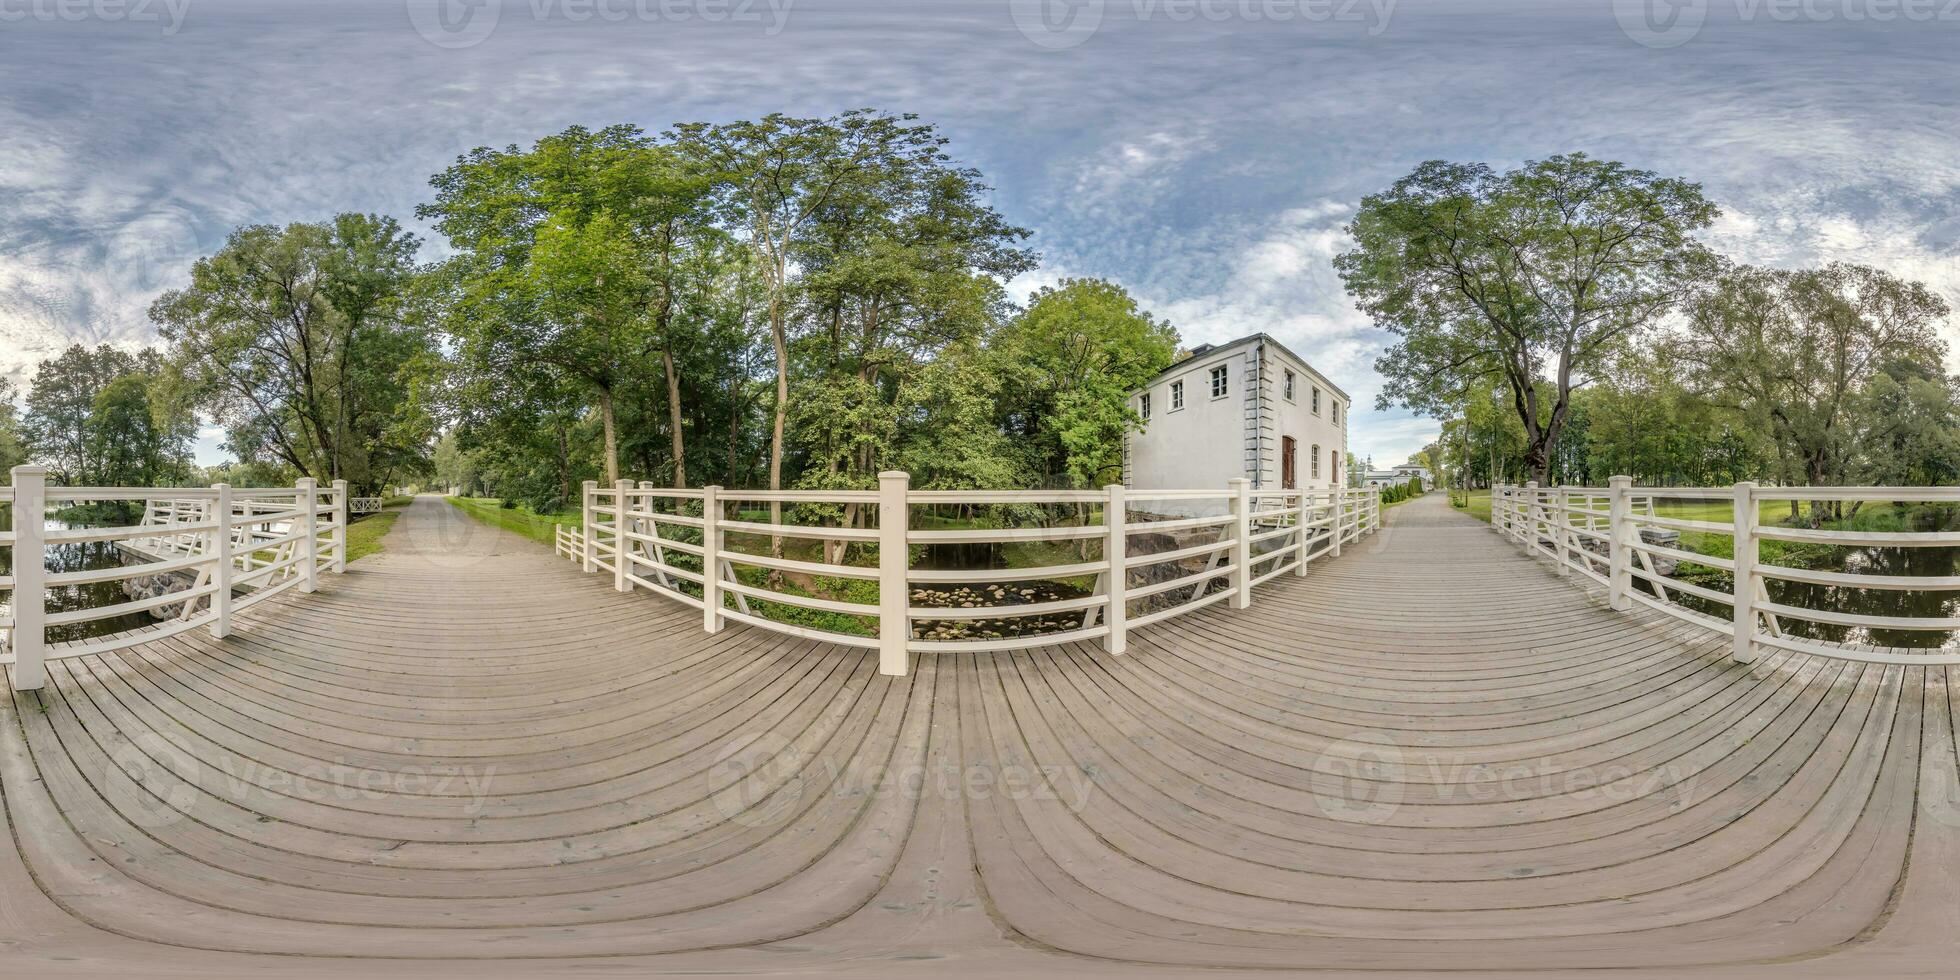 full seamless spherical hdri 360 panorama view on wooden bridge over small river in forest in equirectangular projection, VR AR content. photo